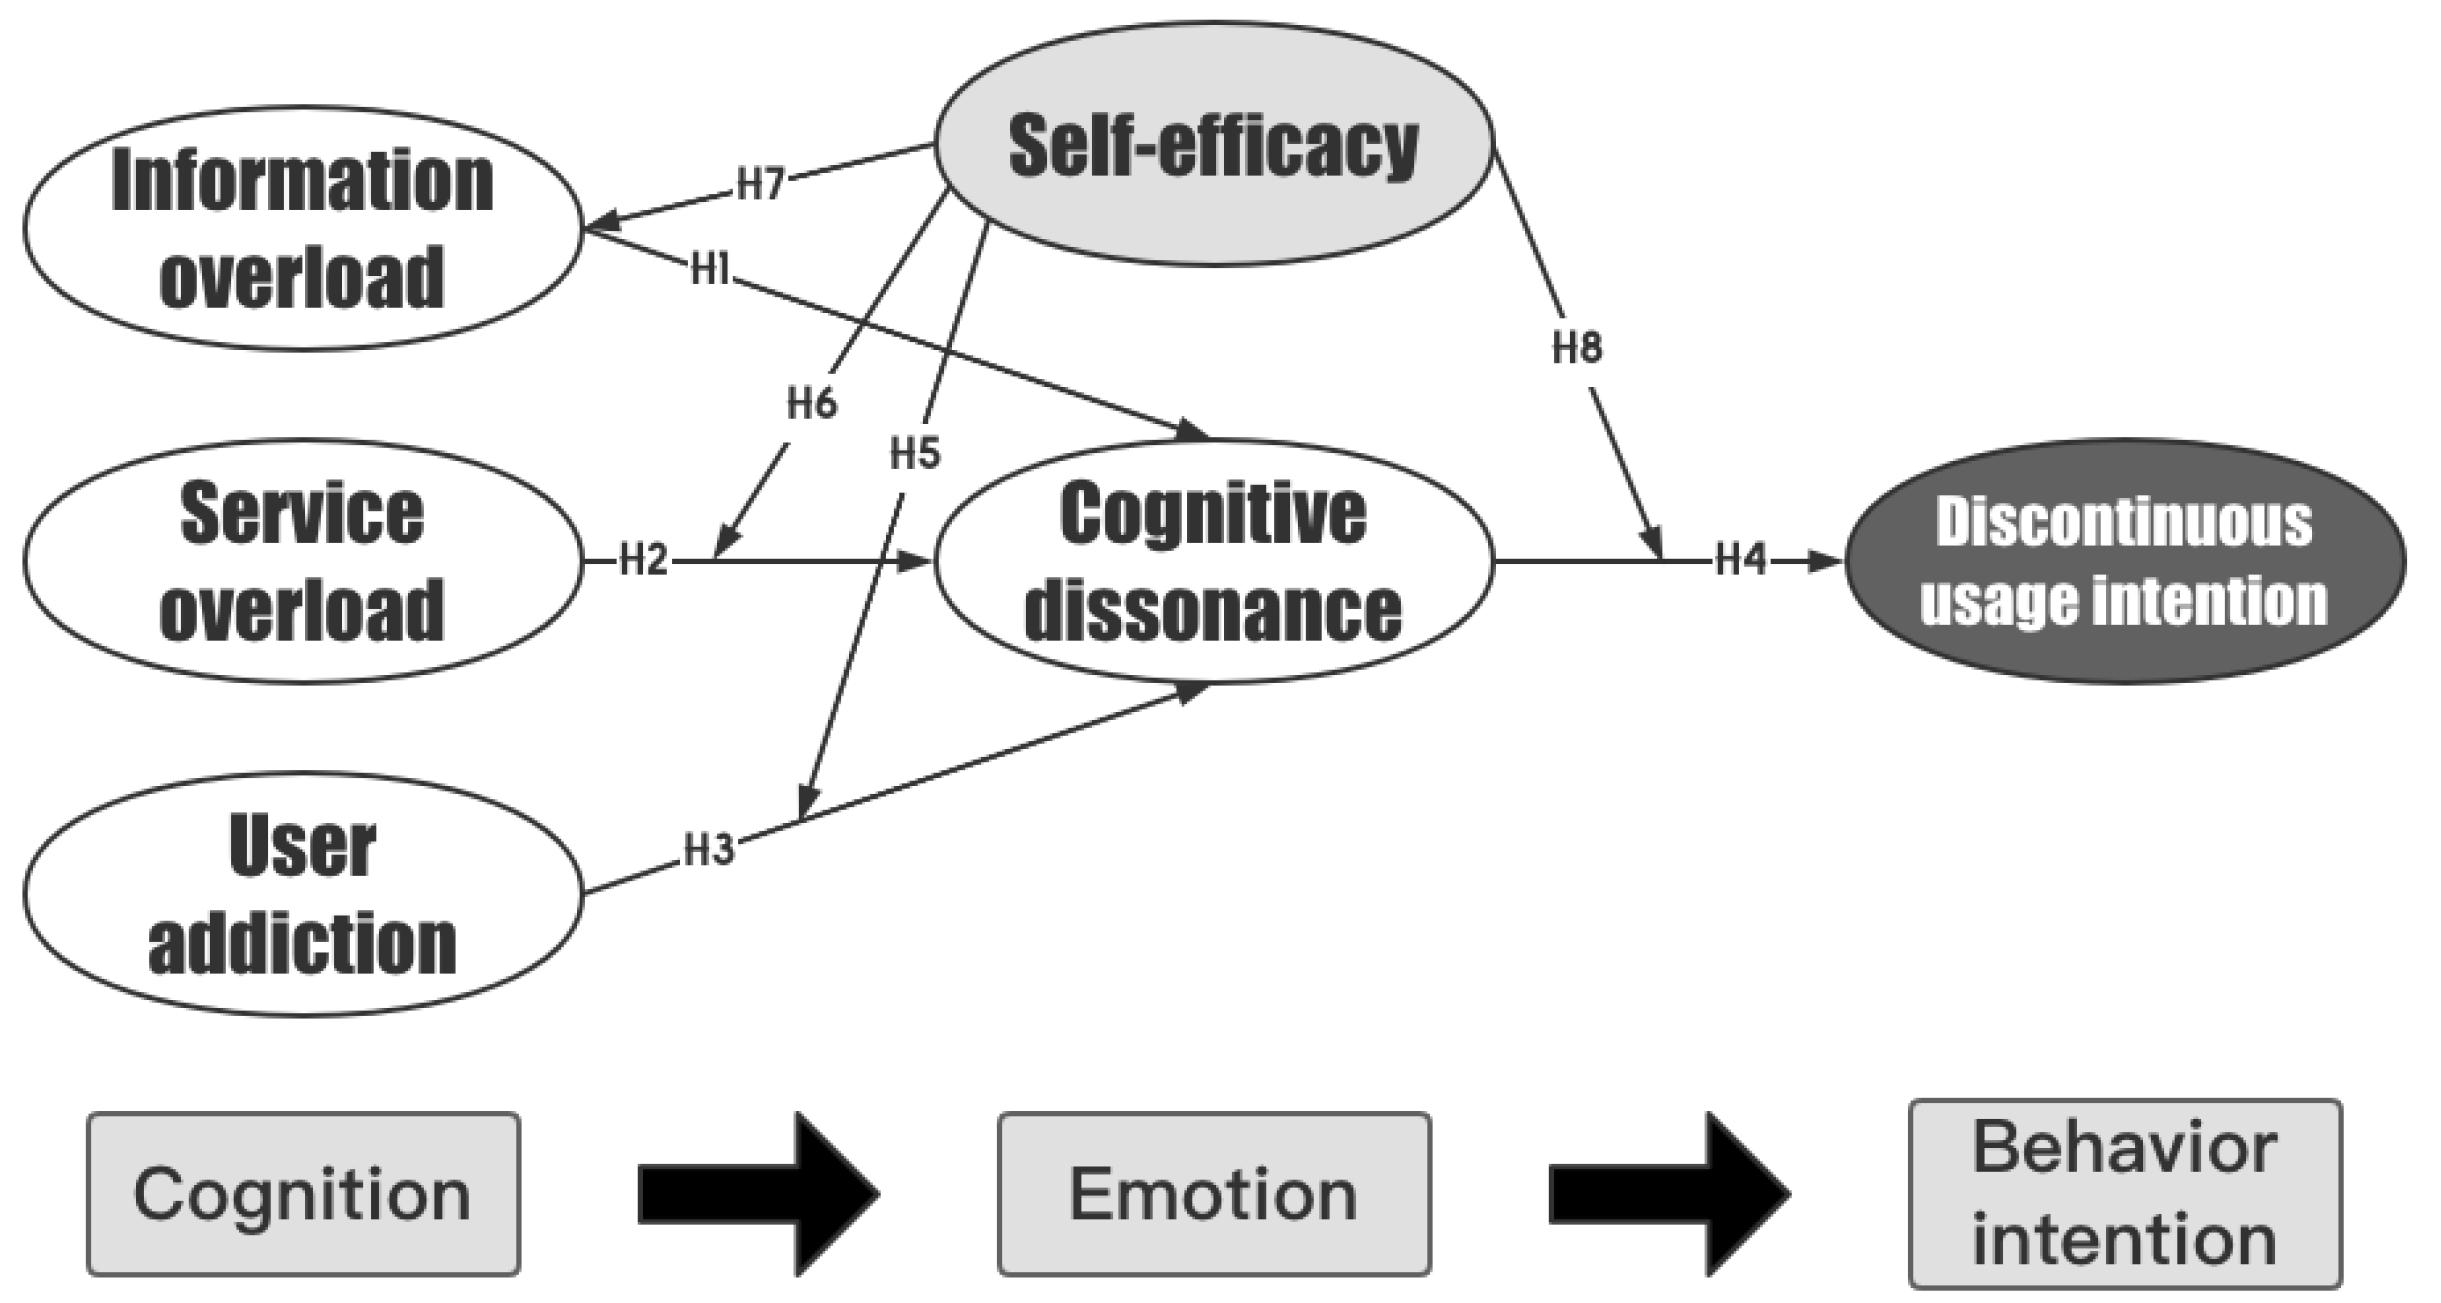 Cognitive Dissonance and Self Efficacy